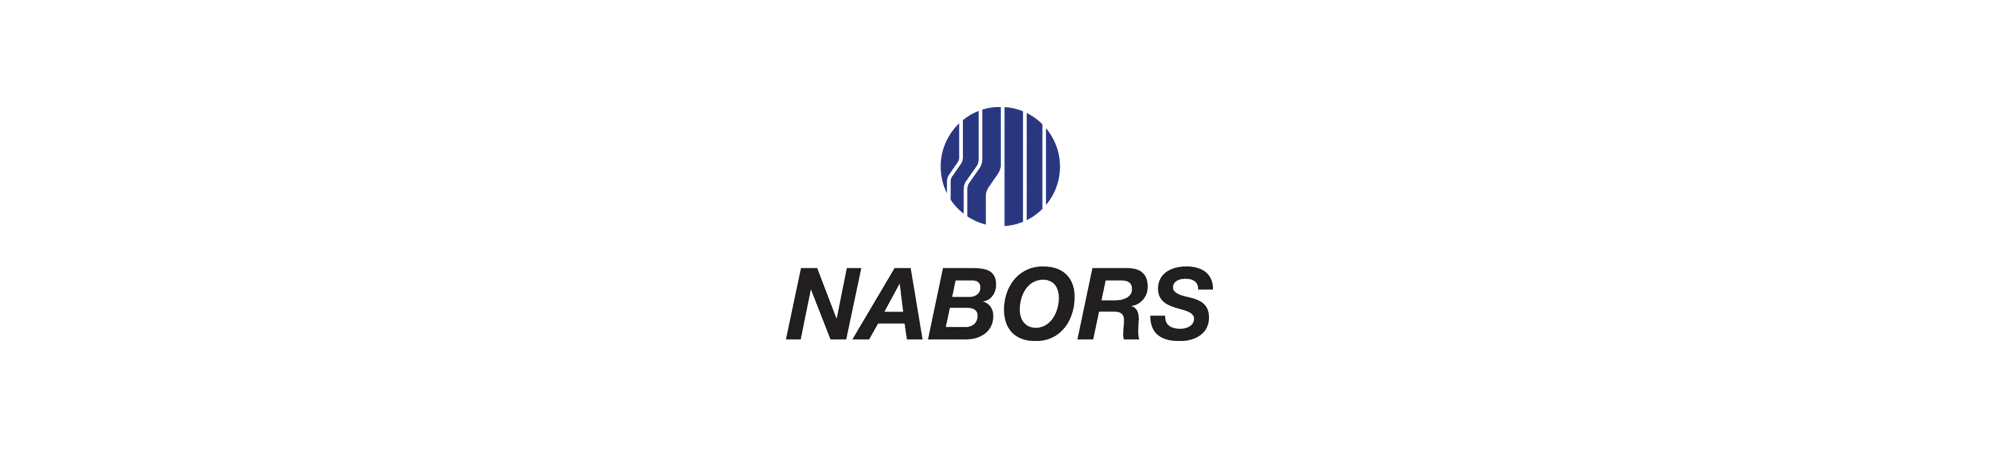 nabors.png